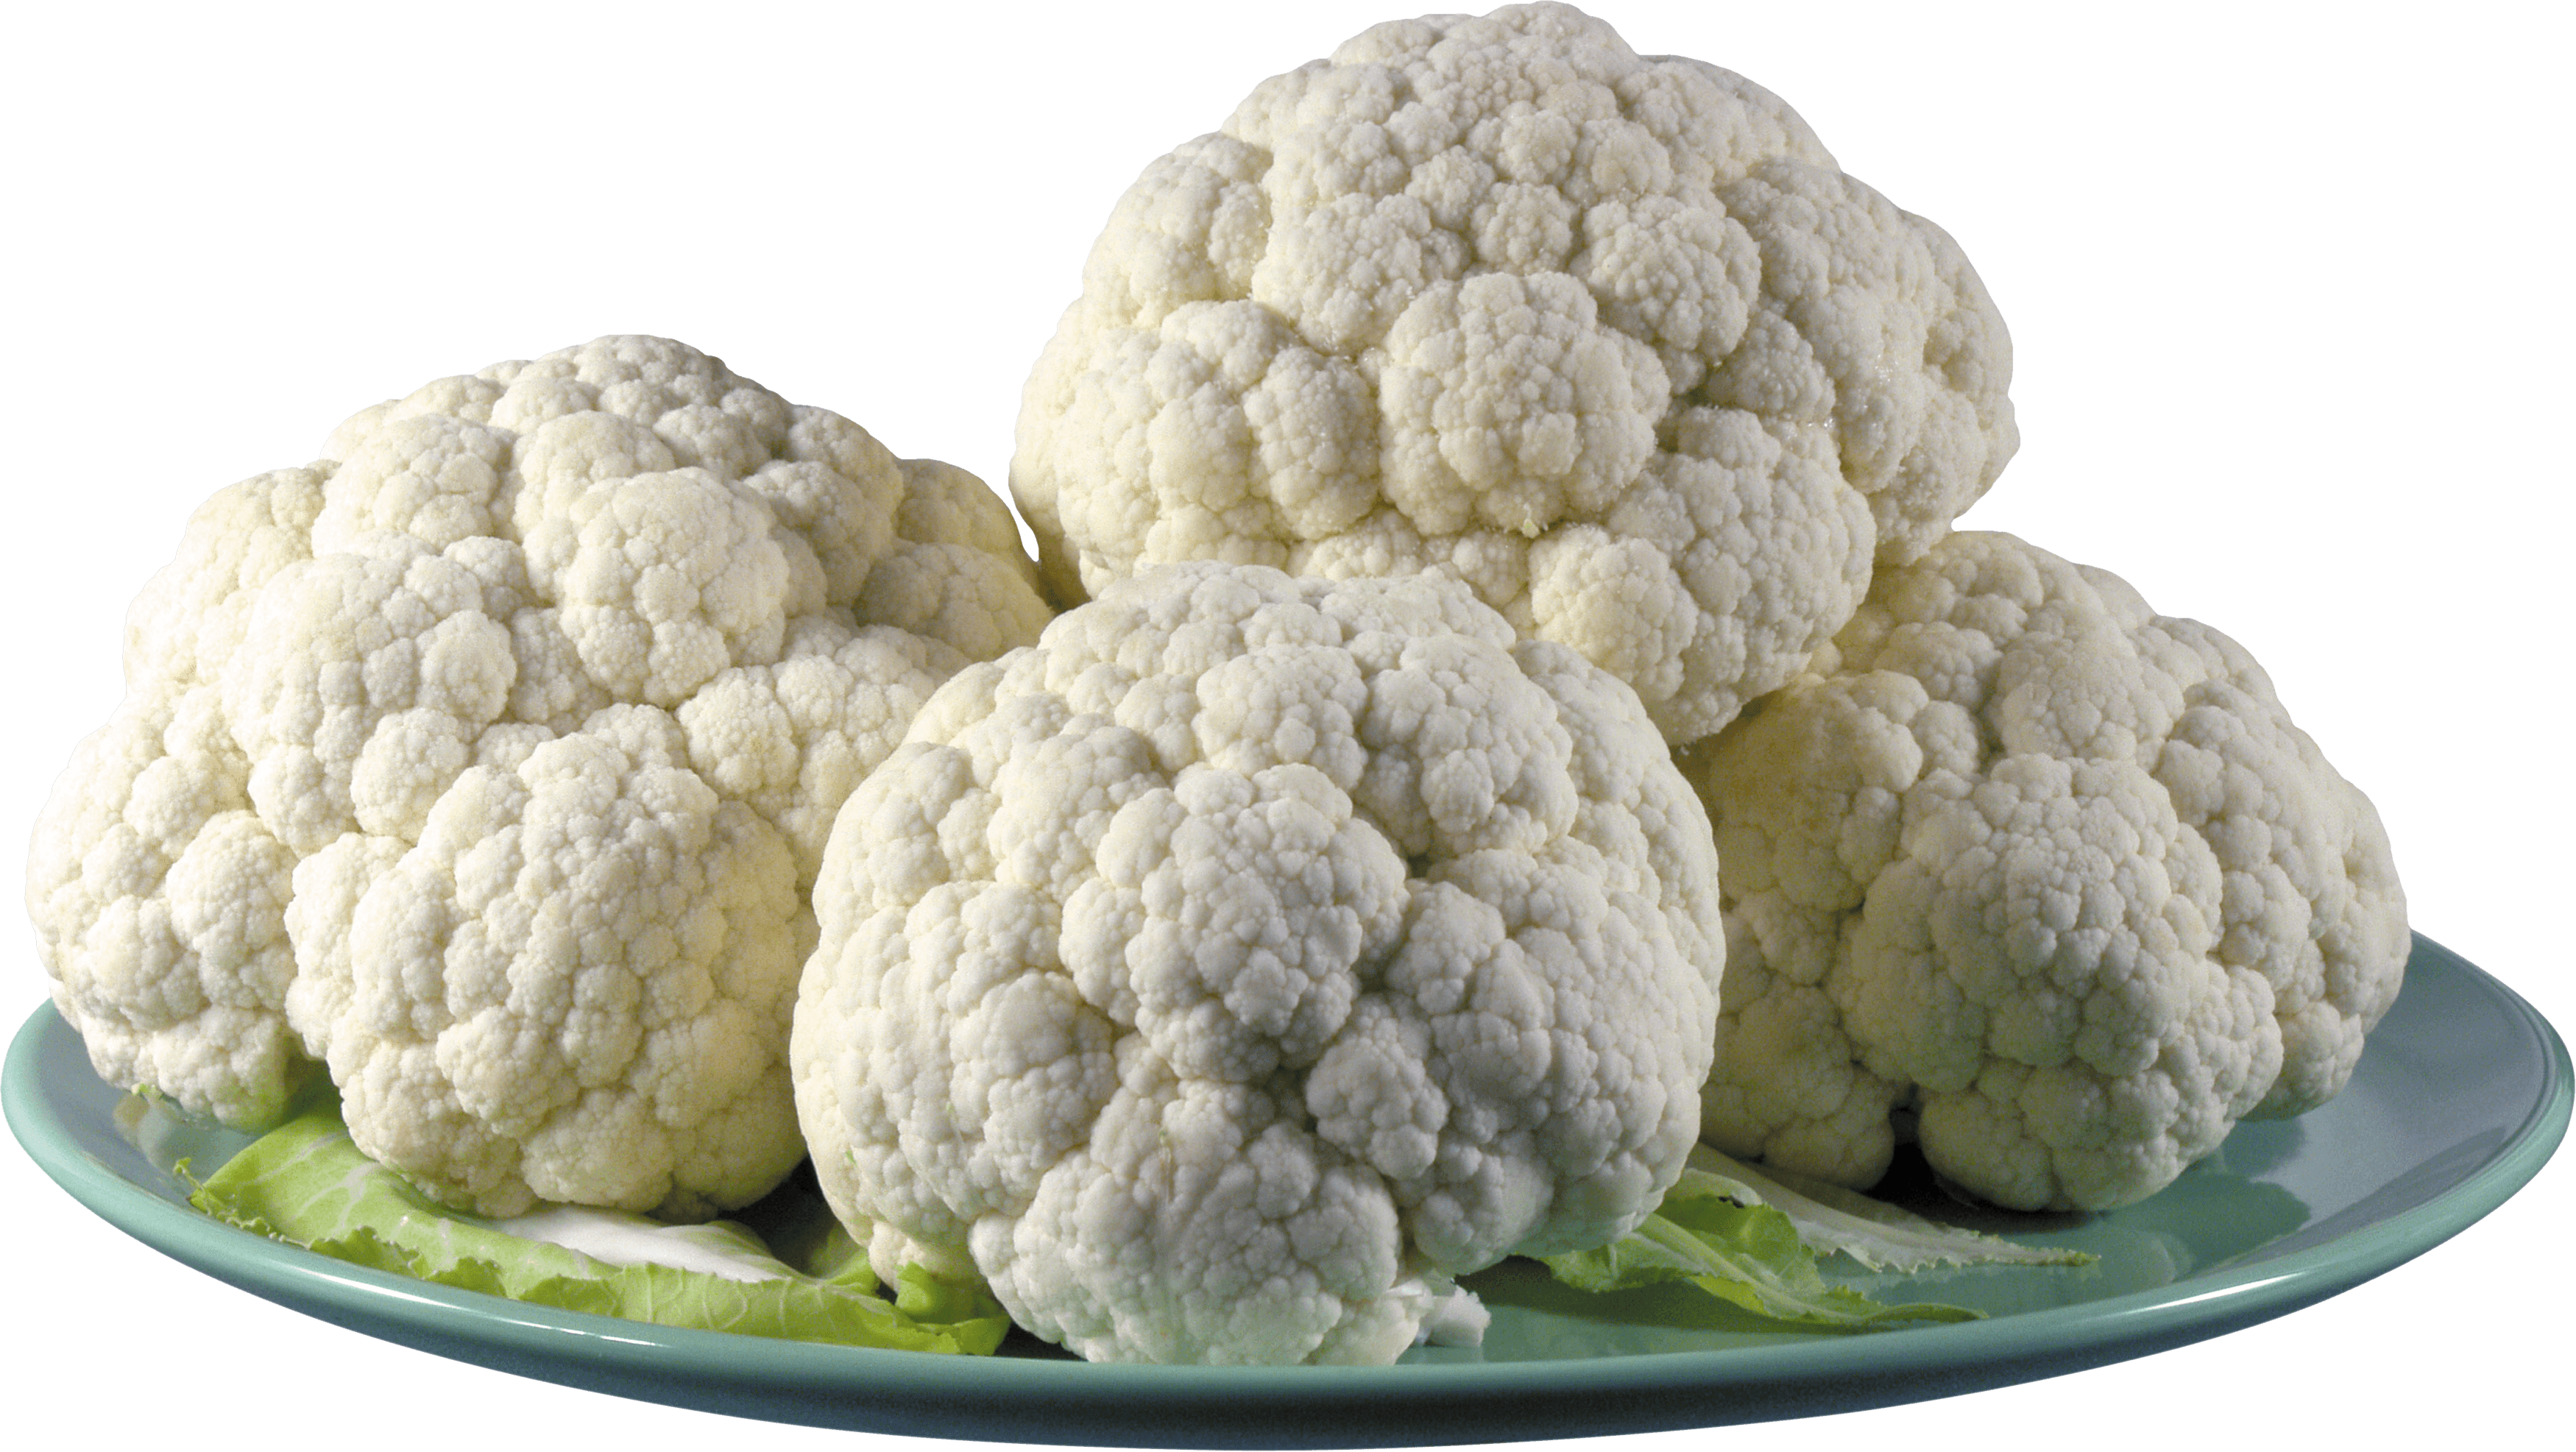 Cauliflower Png Image PNG Image